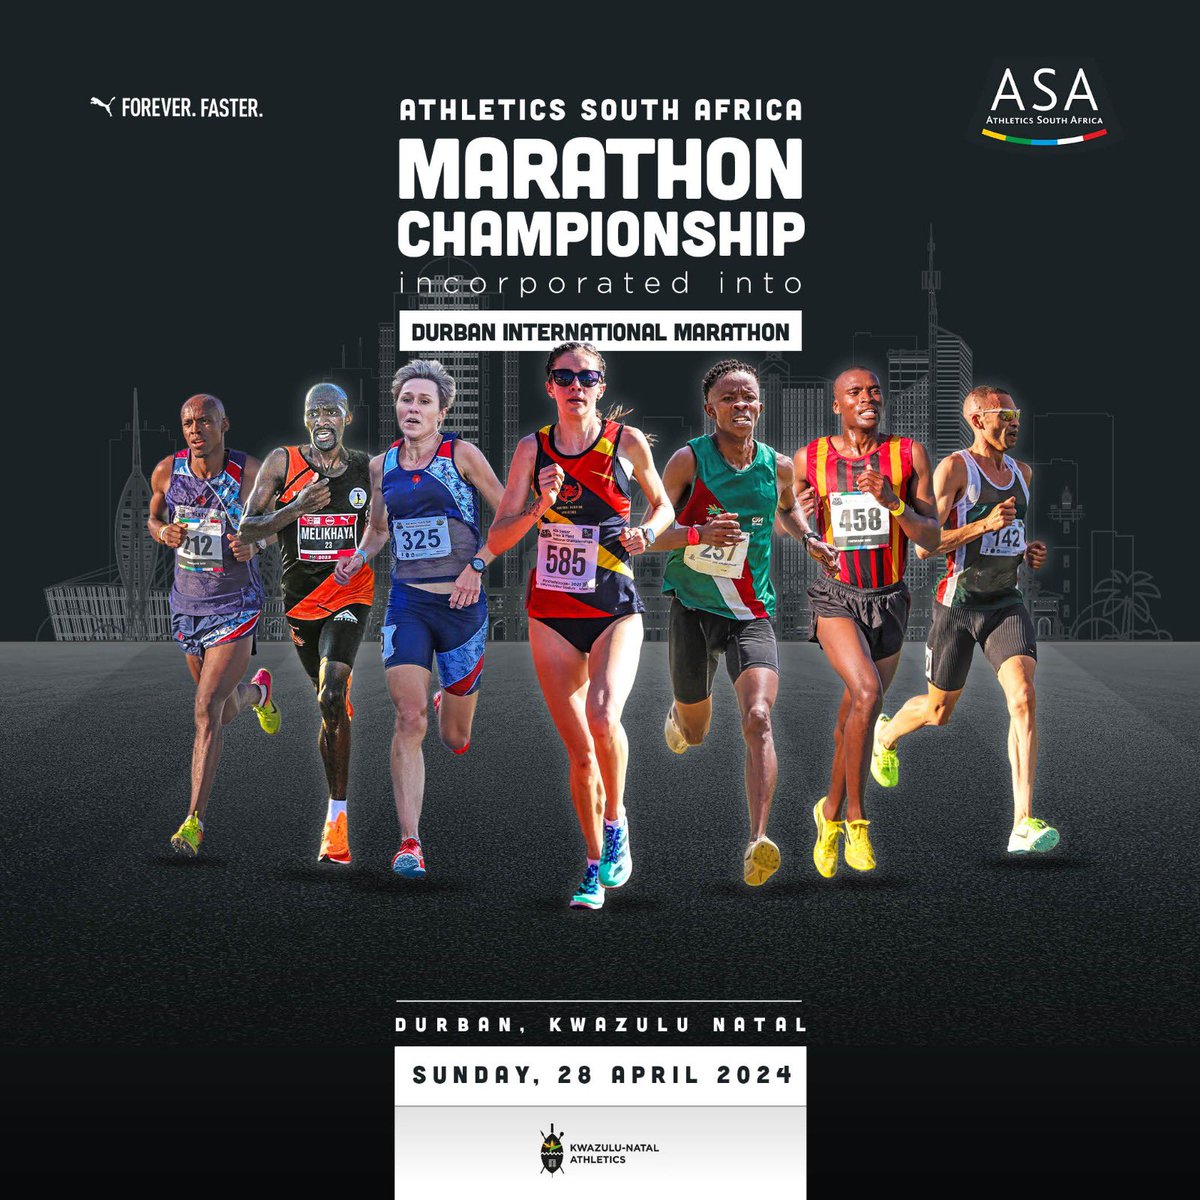 Some of South Africa's most accomplished long-distance runners will converge on Durban for the ASA Marathon Championships on Sunday. We look forward to fast times and great racing 🔥